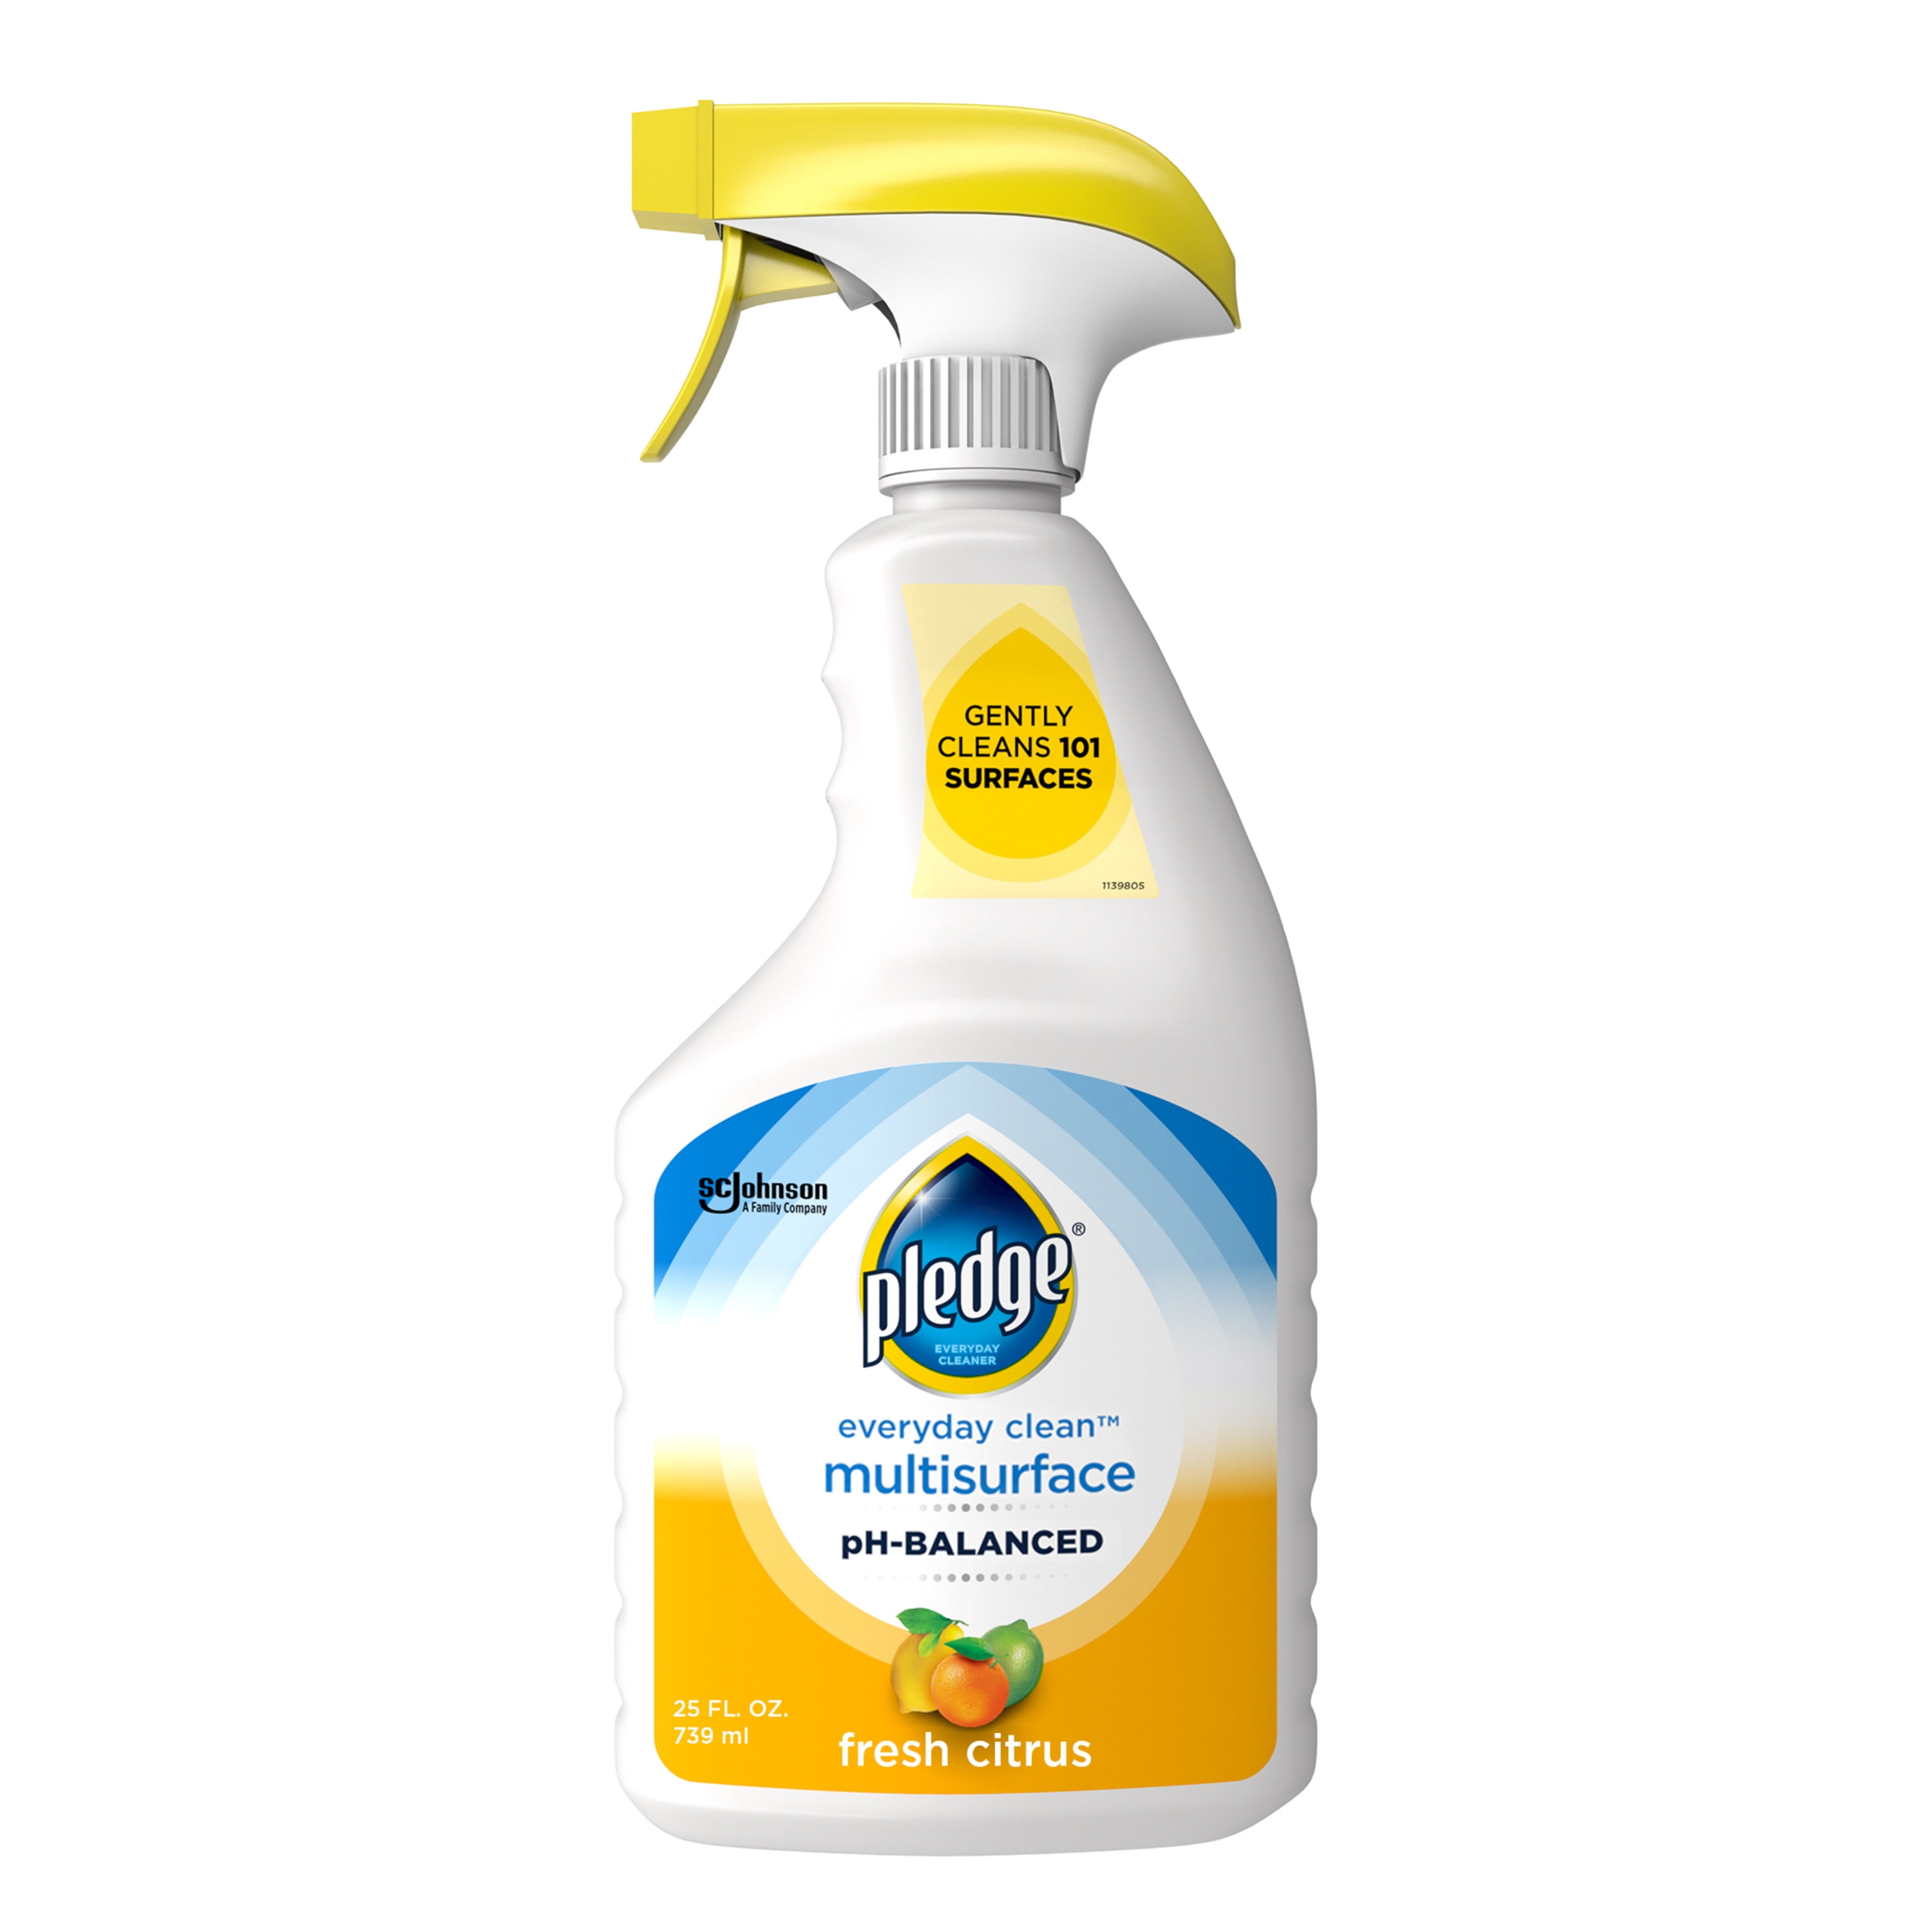 Pledge Multisurface Cleaner, Everyday Clean, Trigger, Fresh Citrus Scent, 25 oz